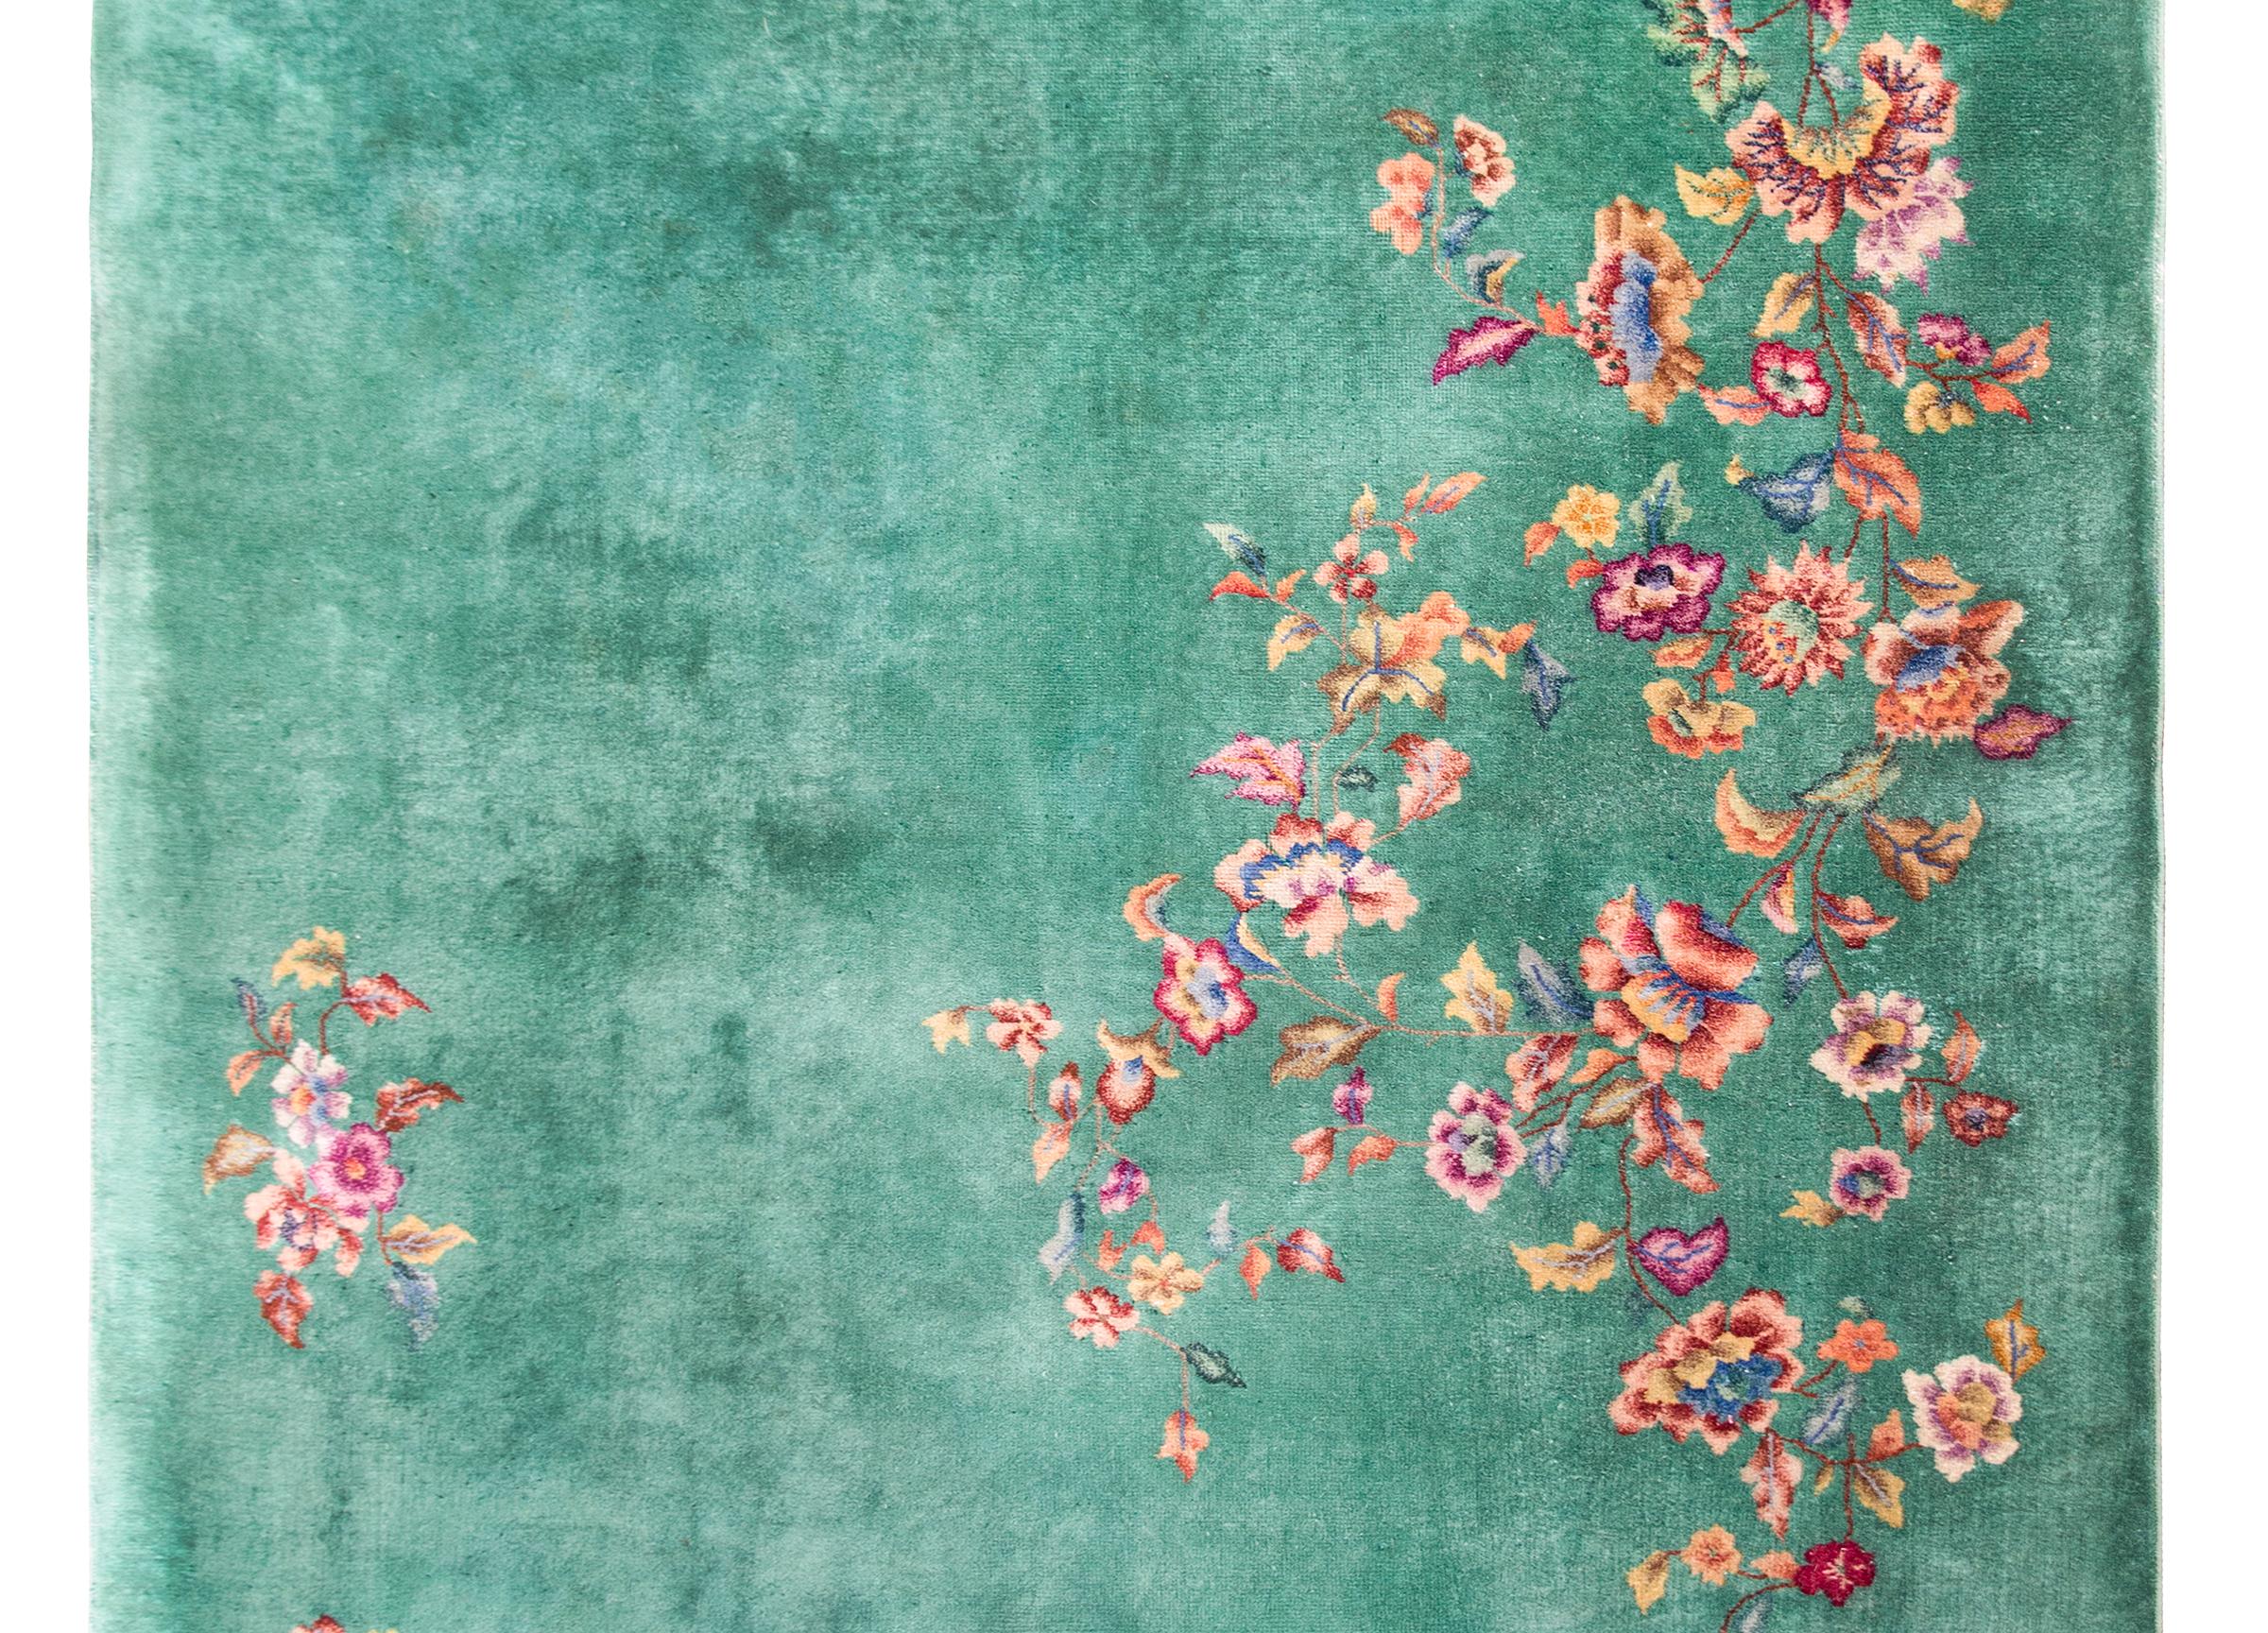 A beautiful early 20th century Chinese Art Deco rug with an all-over celadon green field overlaid with multi-colored peonies, chrysanthemum, lotus, and cherry blossoms, all auspicious symbols of the four seasons.